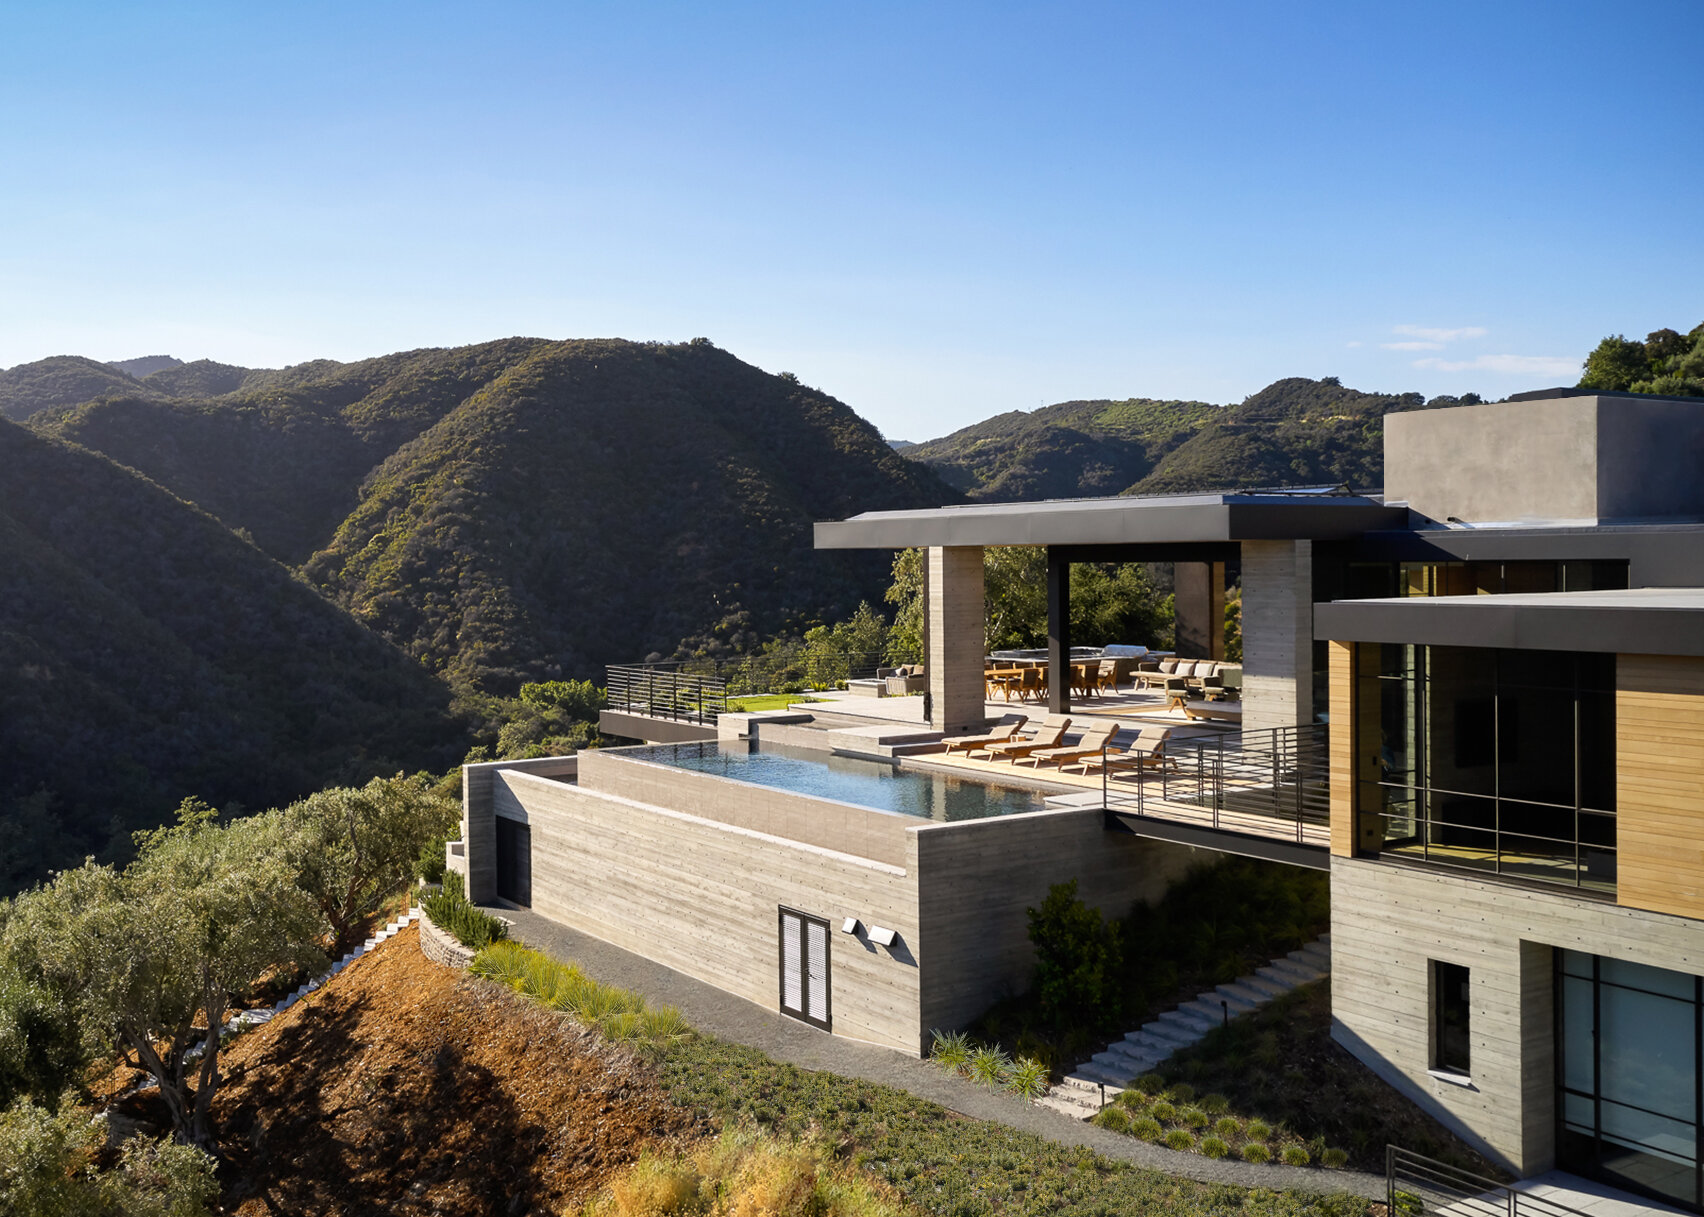  Custom luxury home builder constructed modern private residence in the Pacific Palisades neighborhood of Los Angeles featuring open layout and infinity pool. 